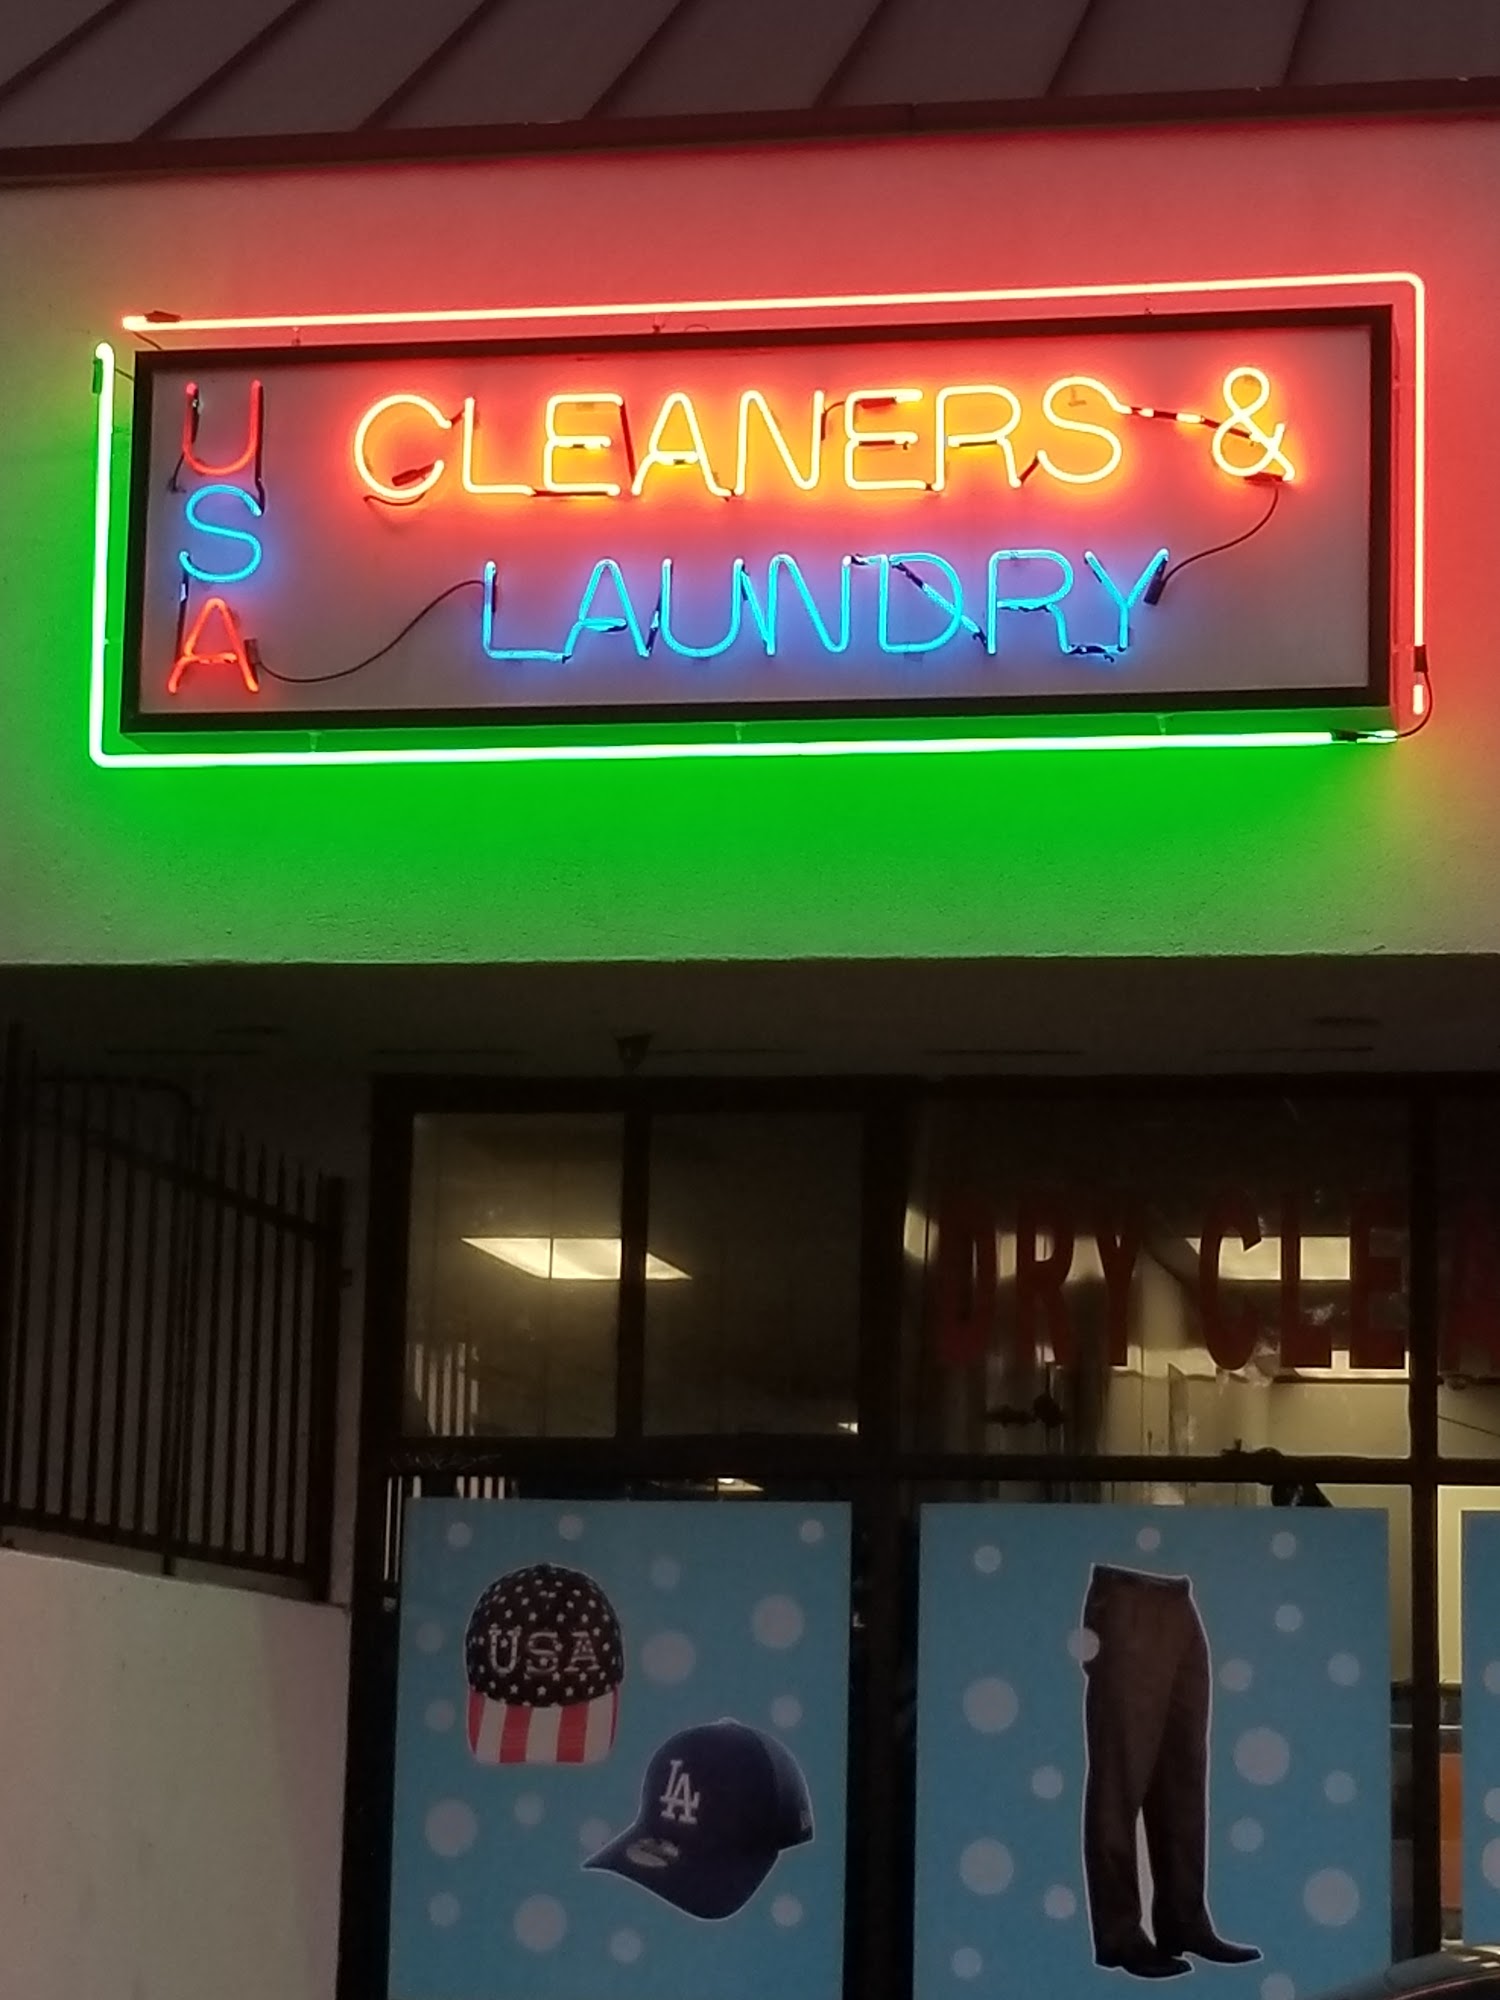 USA Cleaners & Laundry